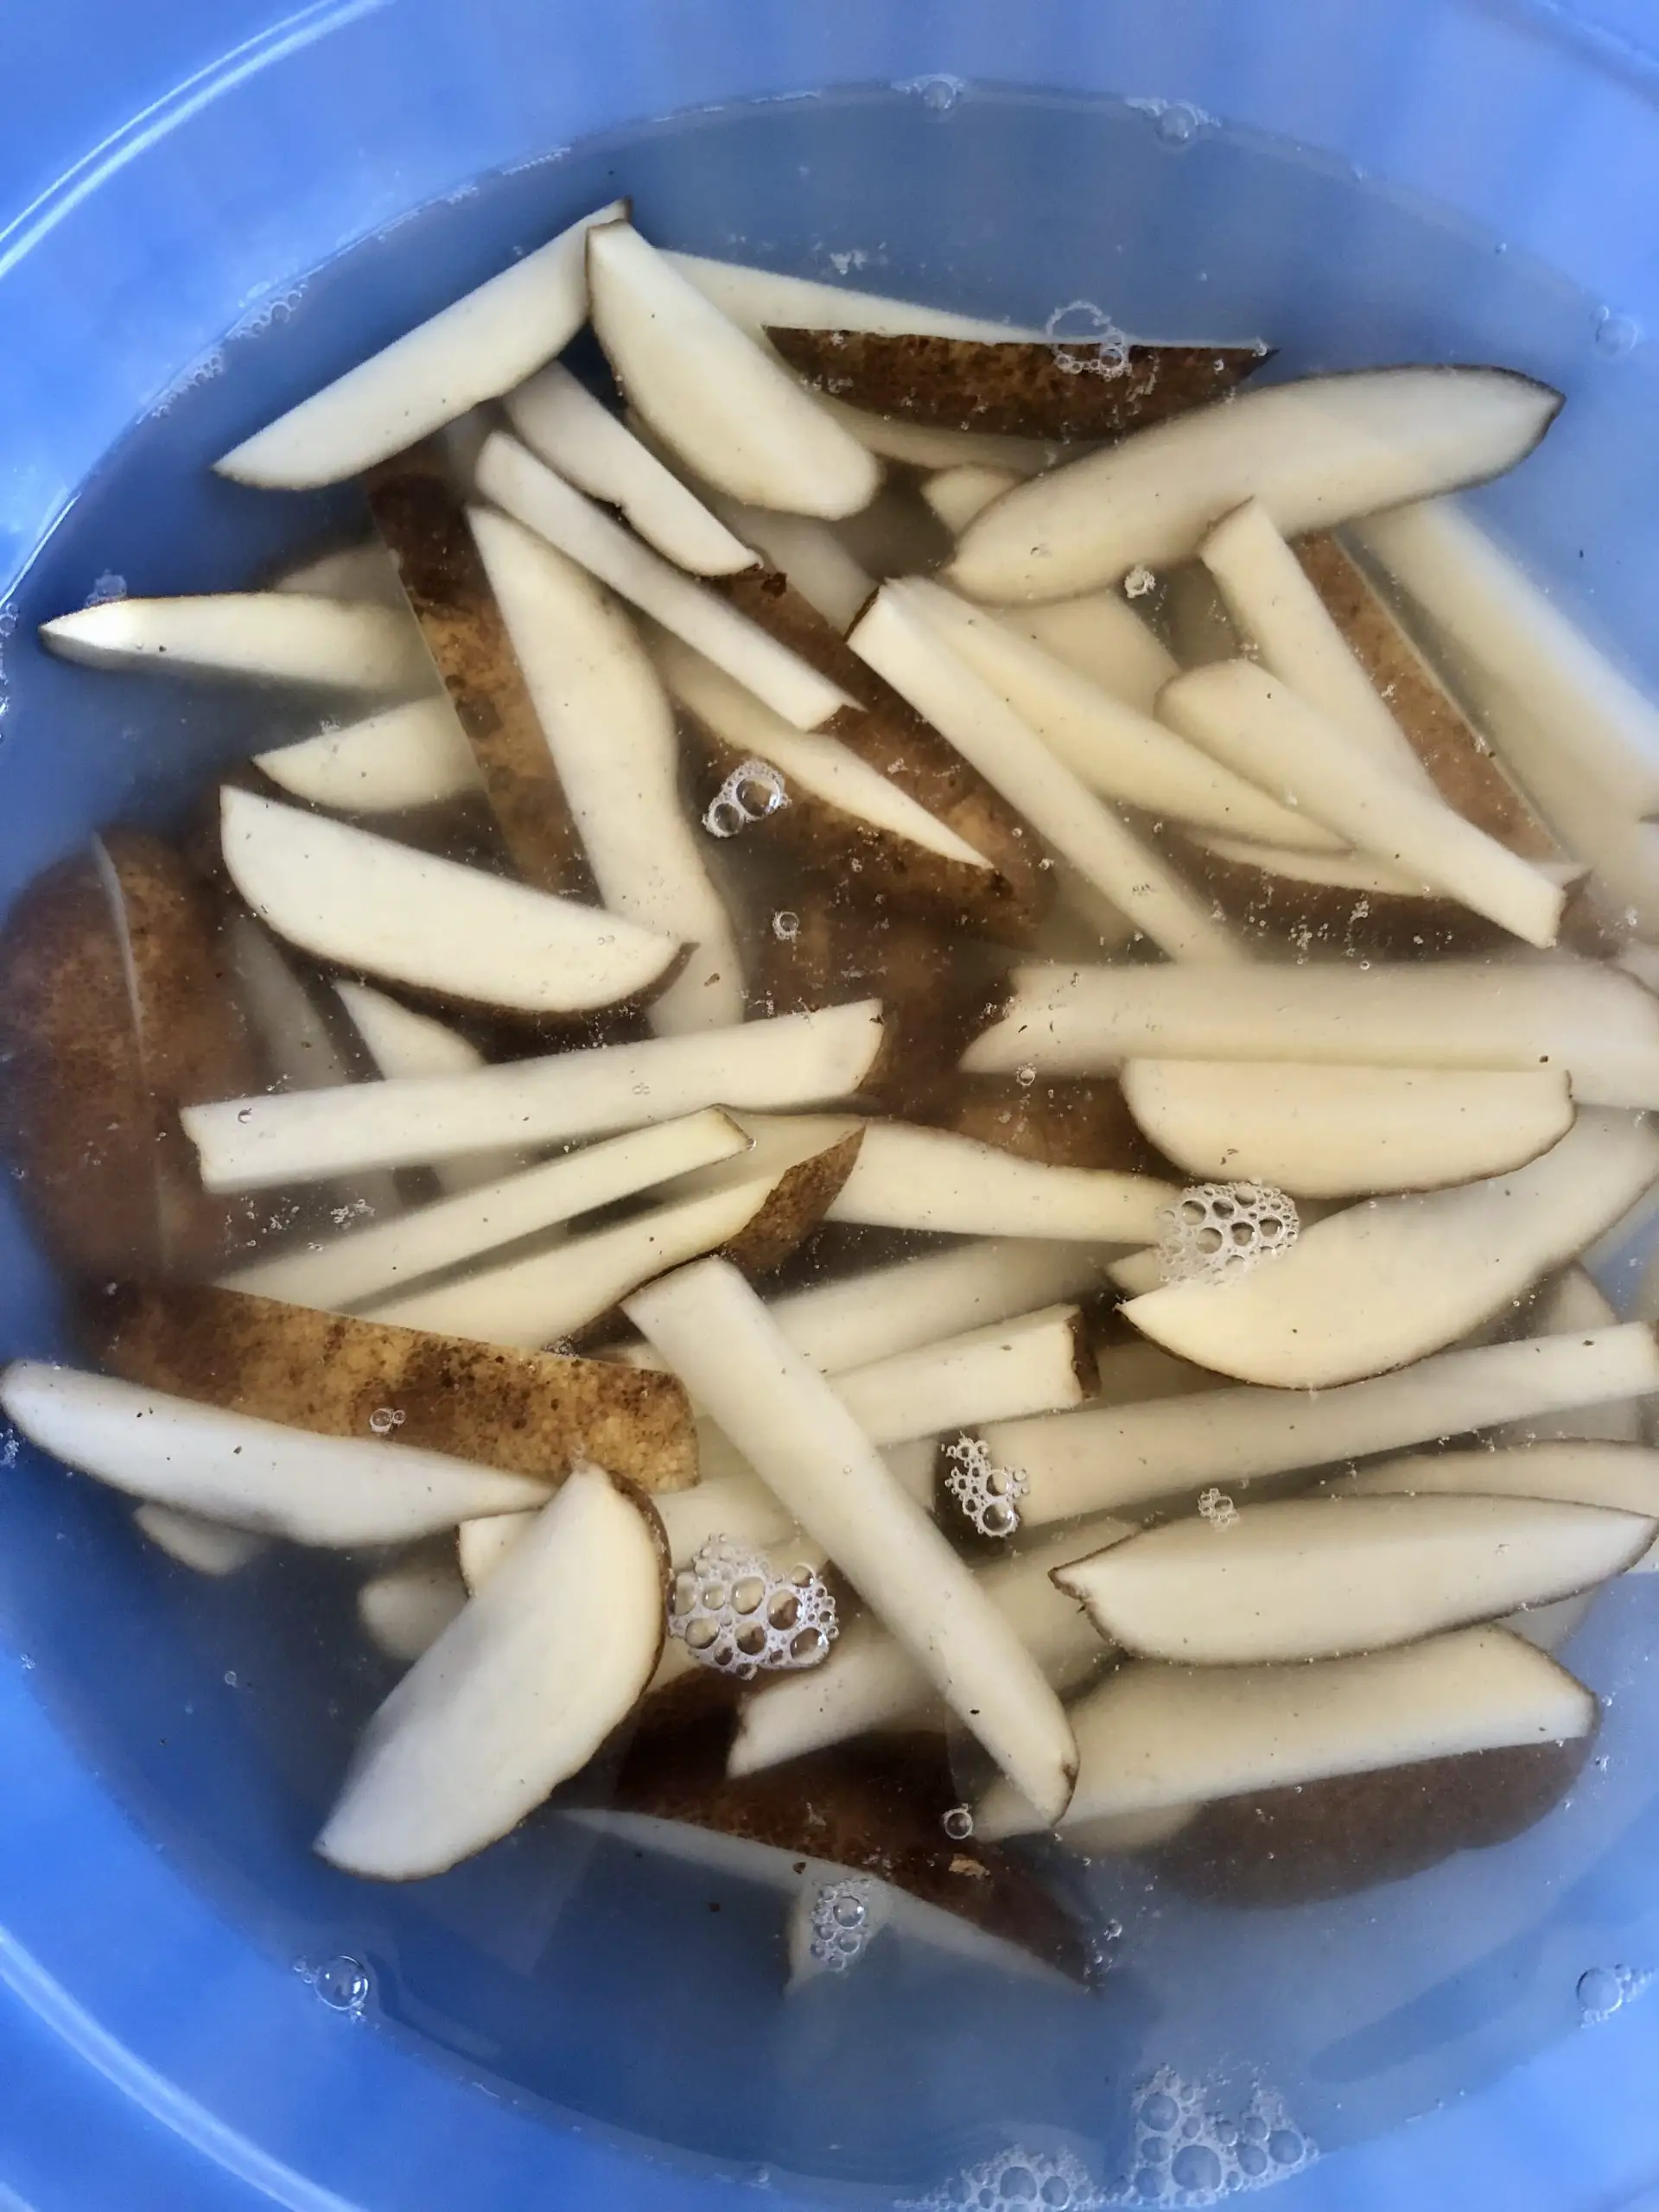 strips of russet potato soaking in water in a blue bowl